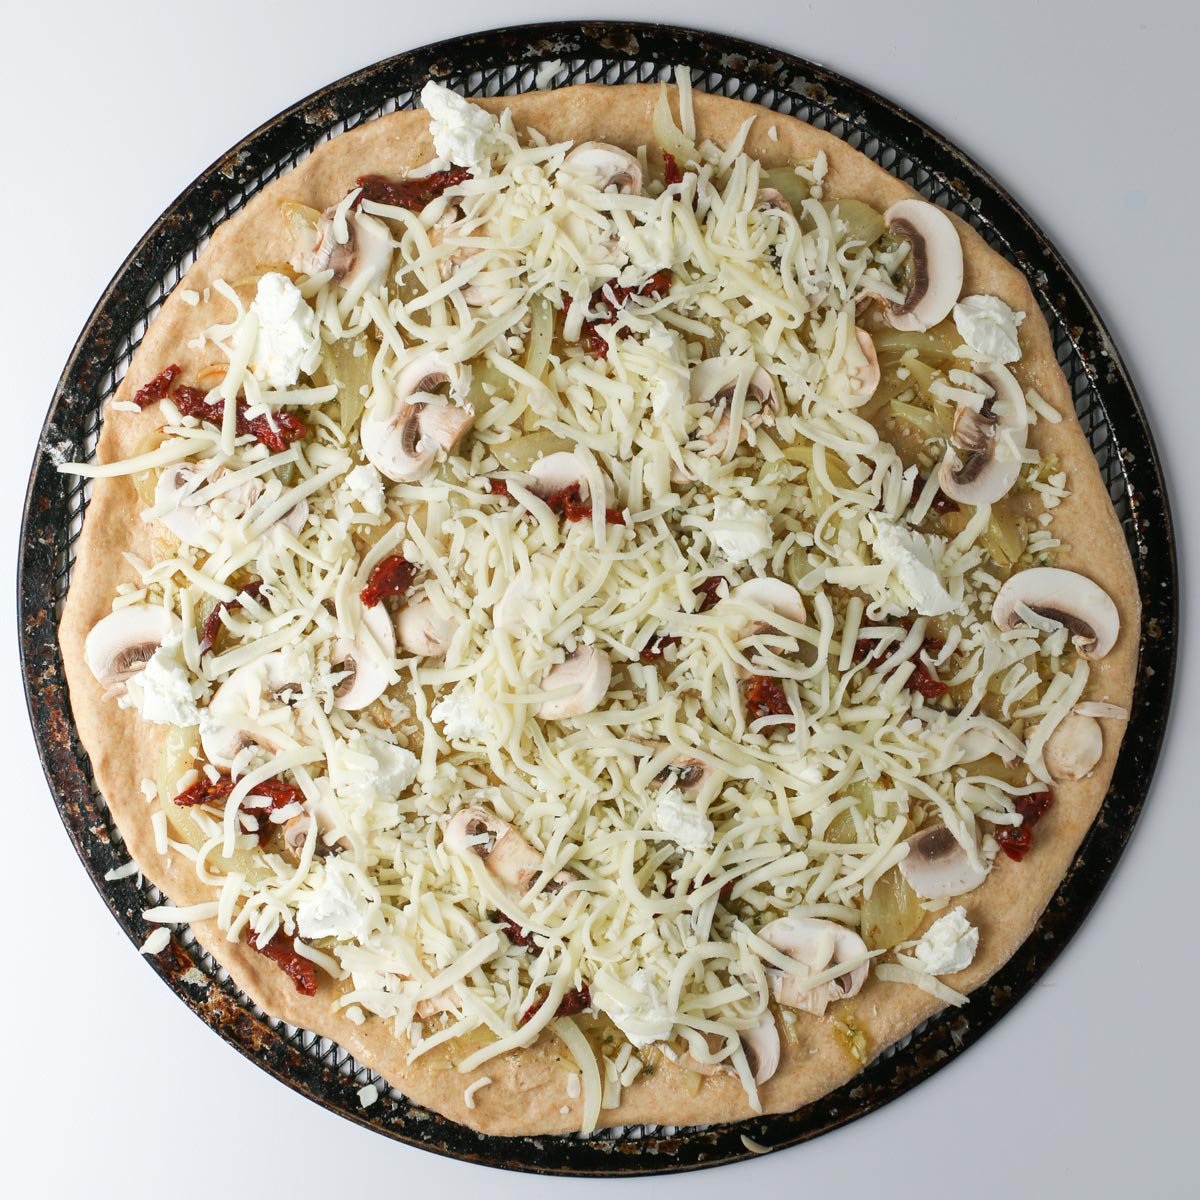 cheeses added to the pizza.